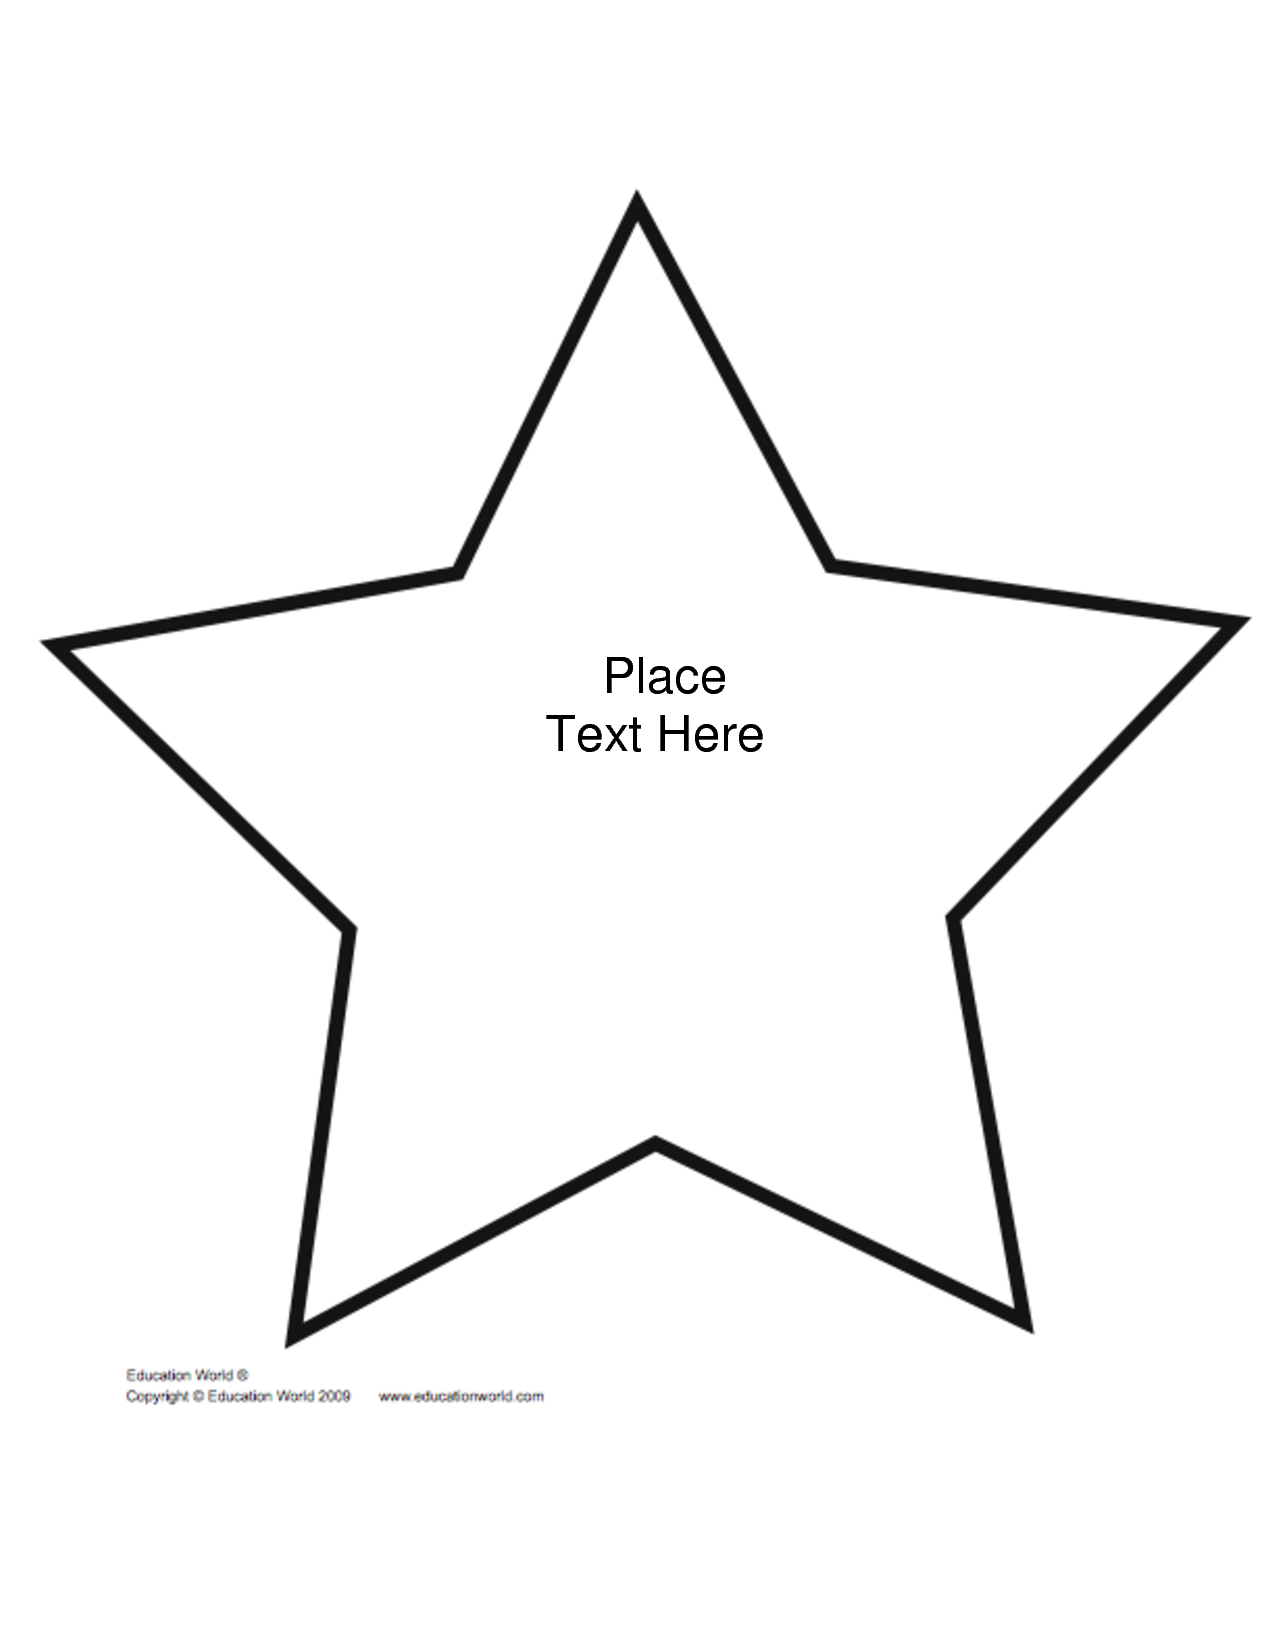 Best Photos of Large Printable Star Shapes - Star Shape Templates ...